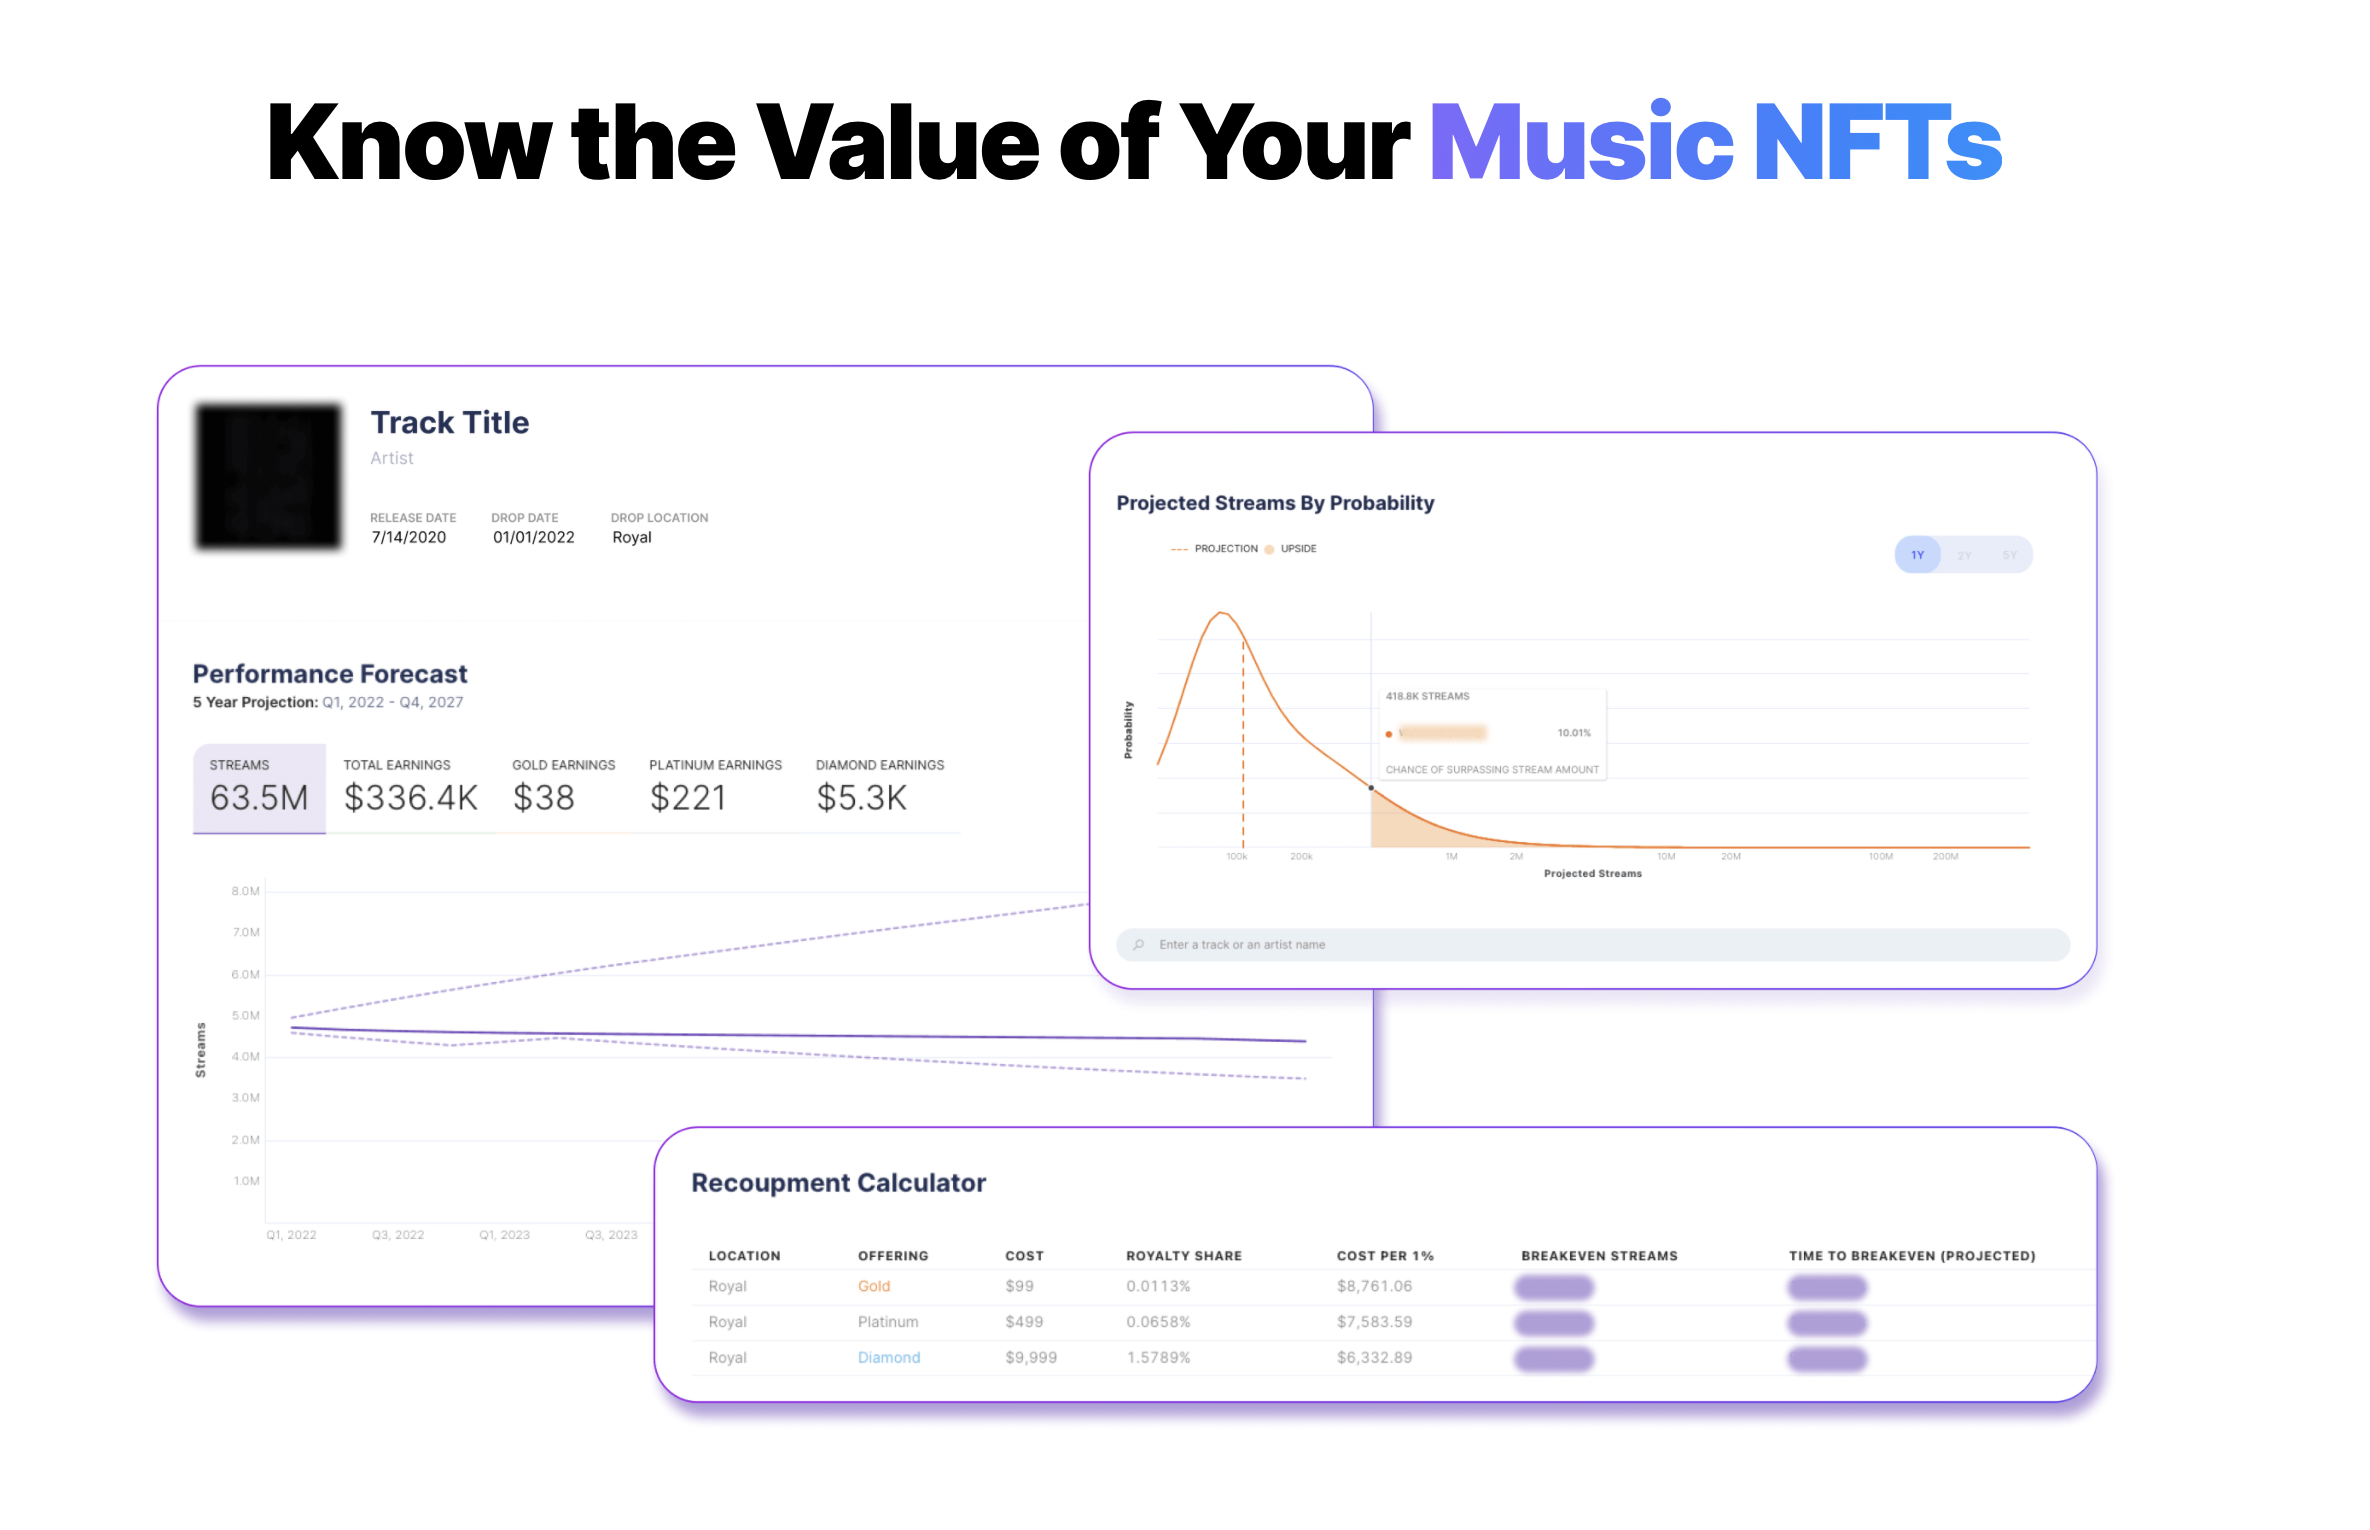 Dopr provides 5-year stream and earnings forecasts, as well as a recoupment calculator for music NFTs.  